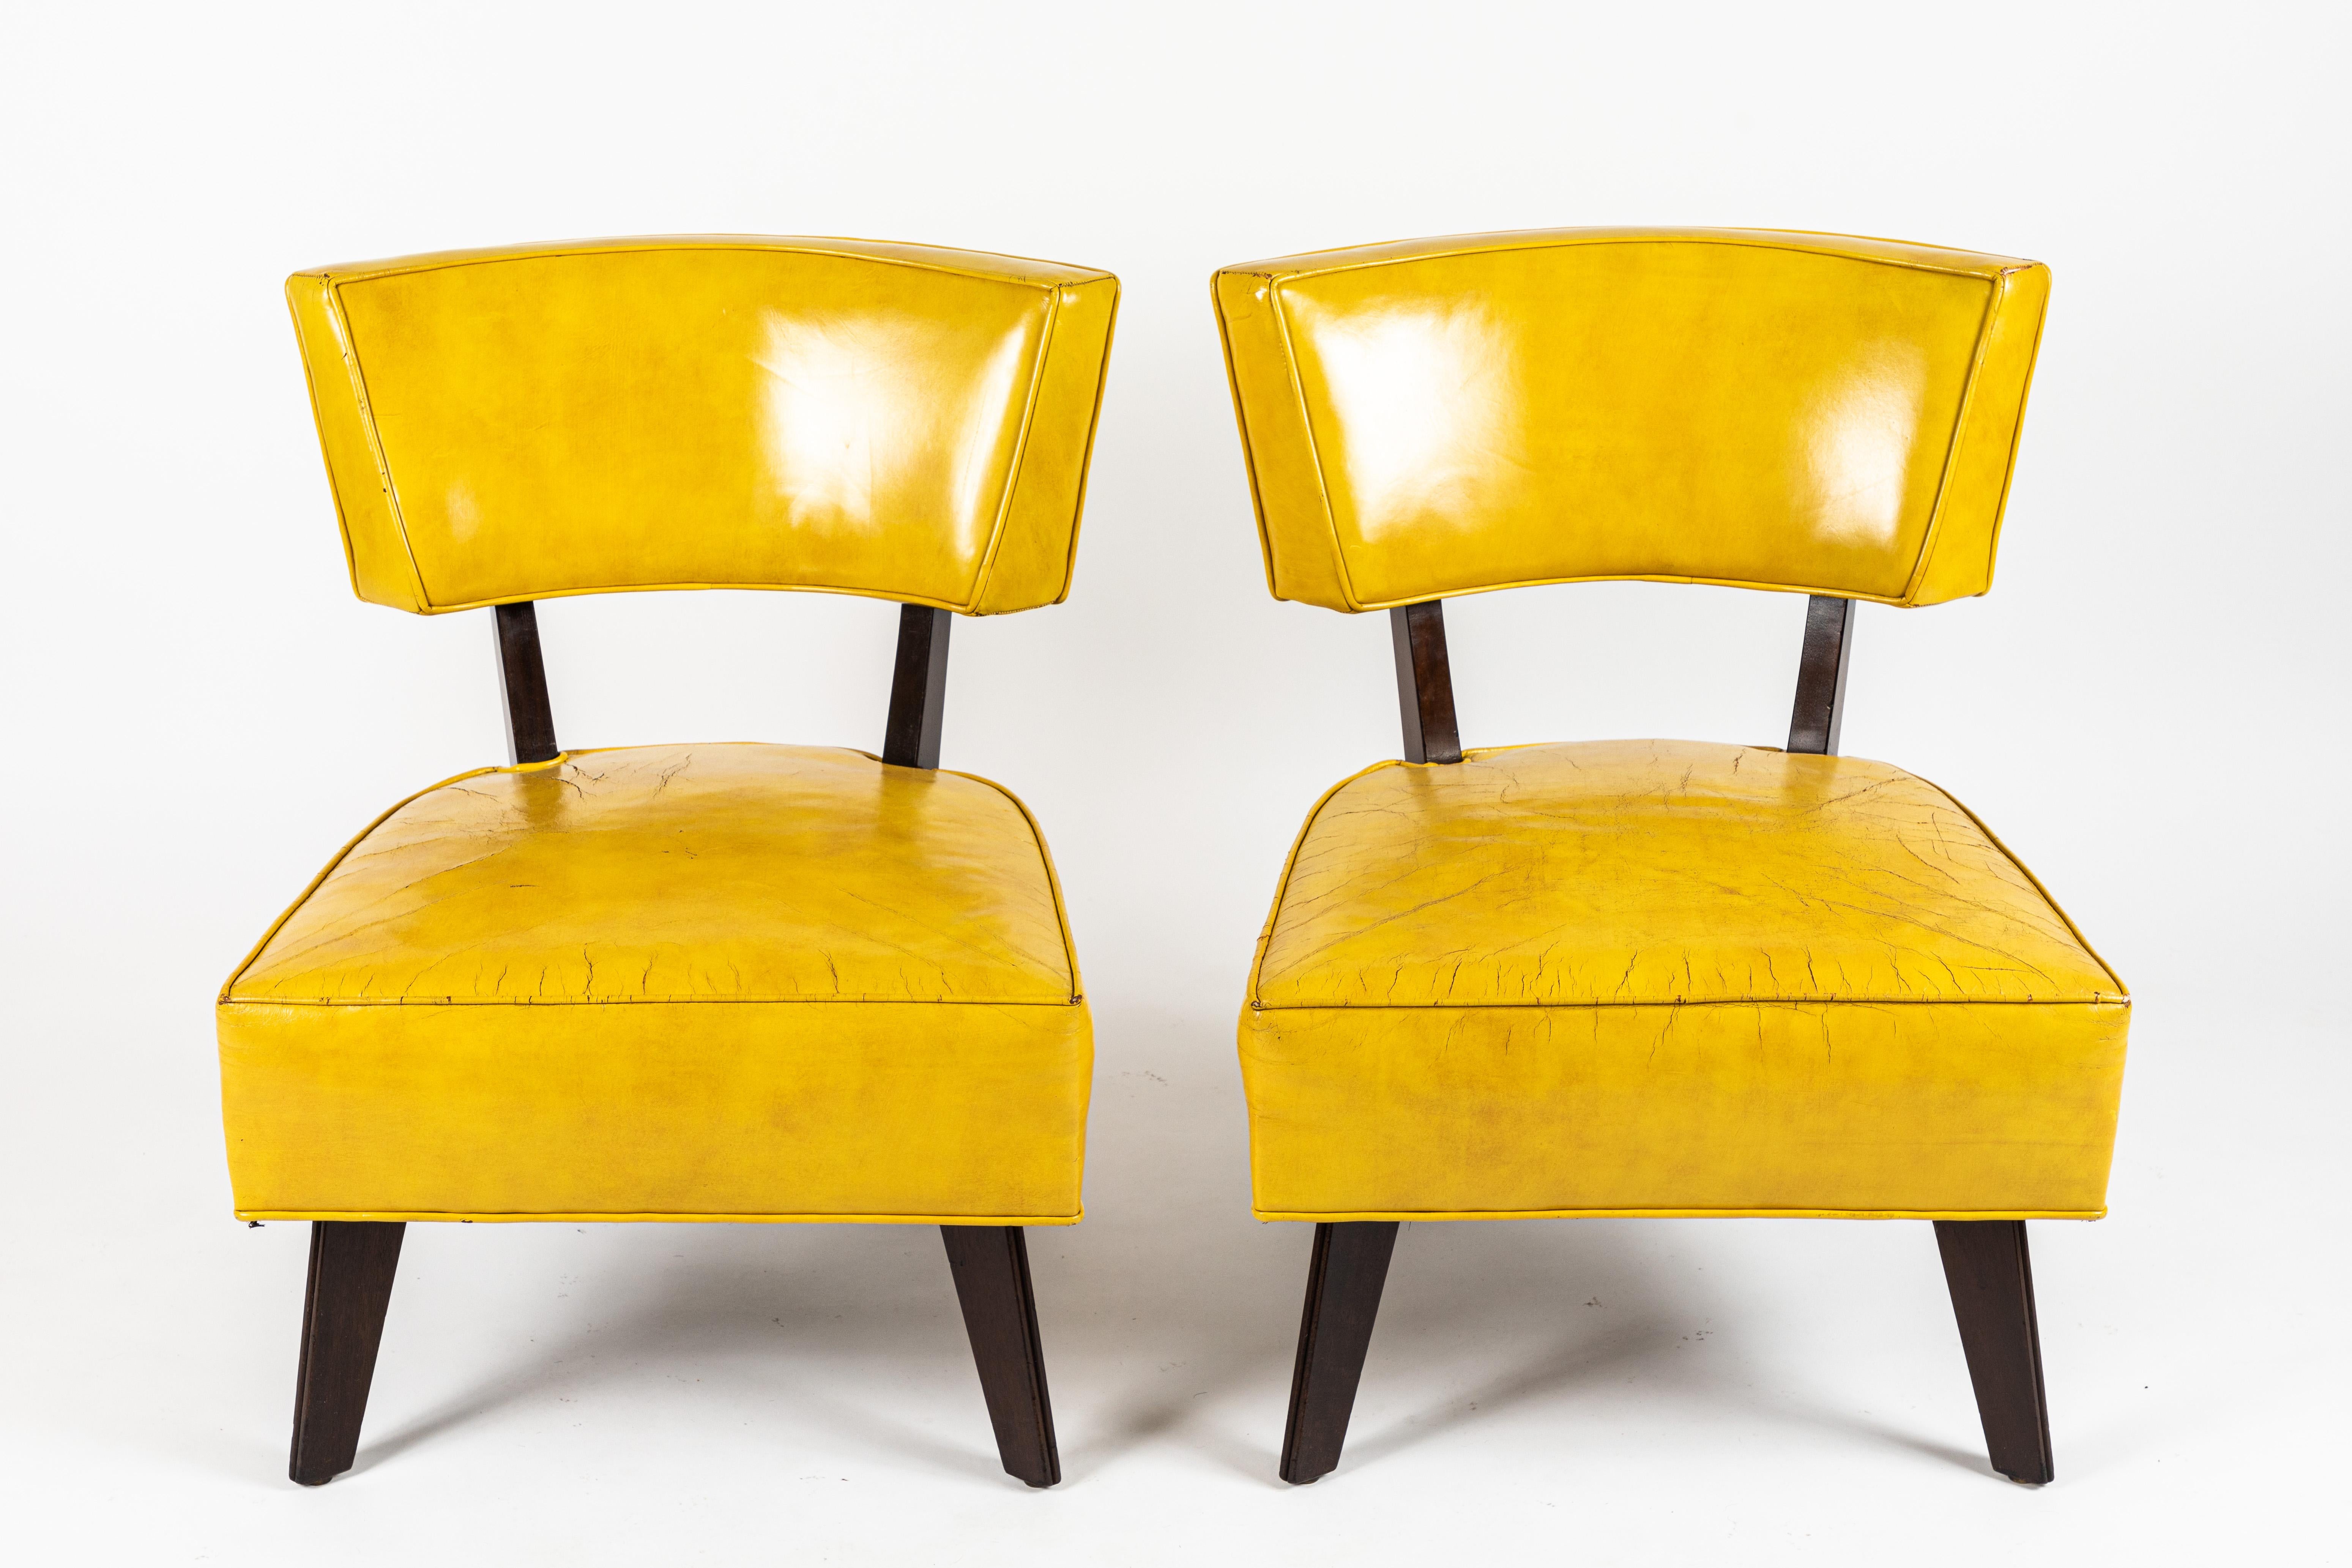 Pair of Low Chairs Designed by William Haines 1